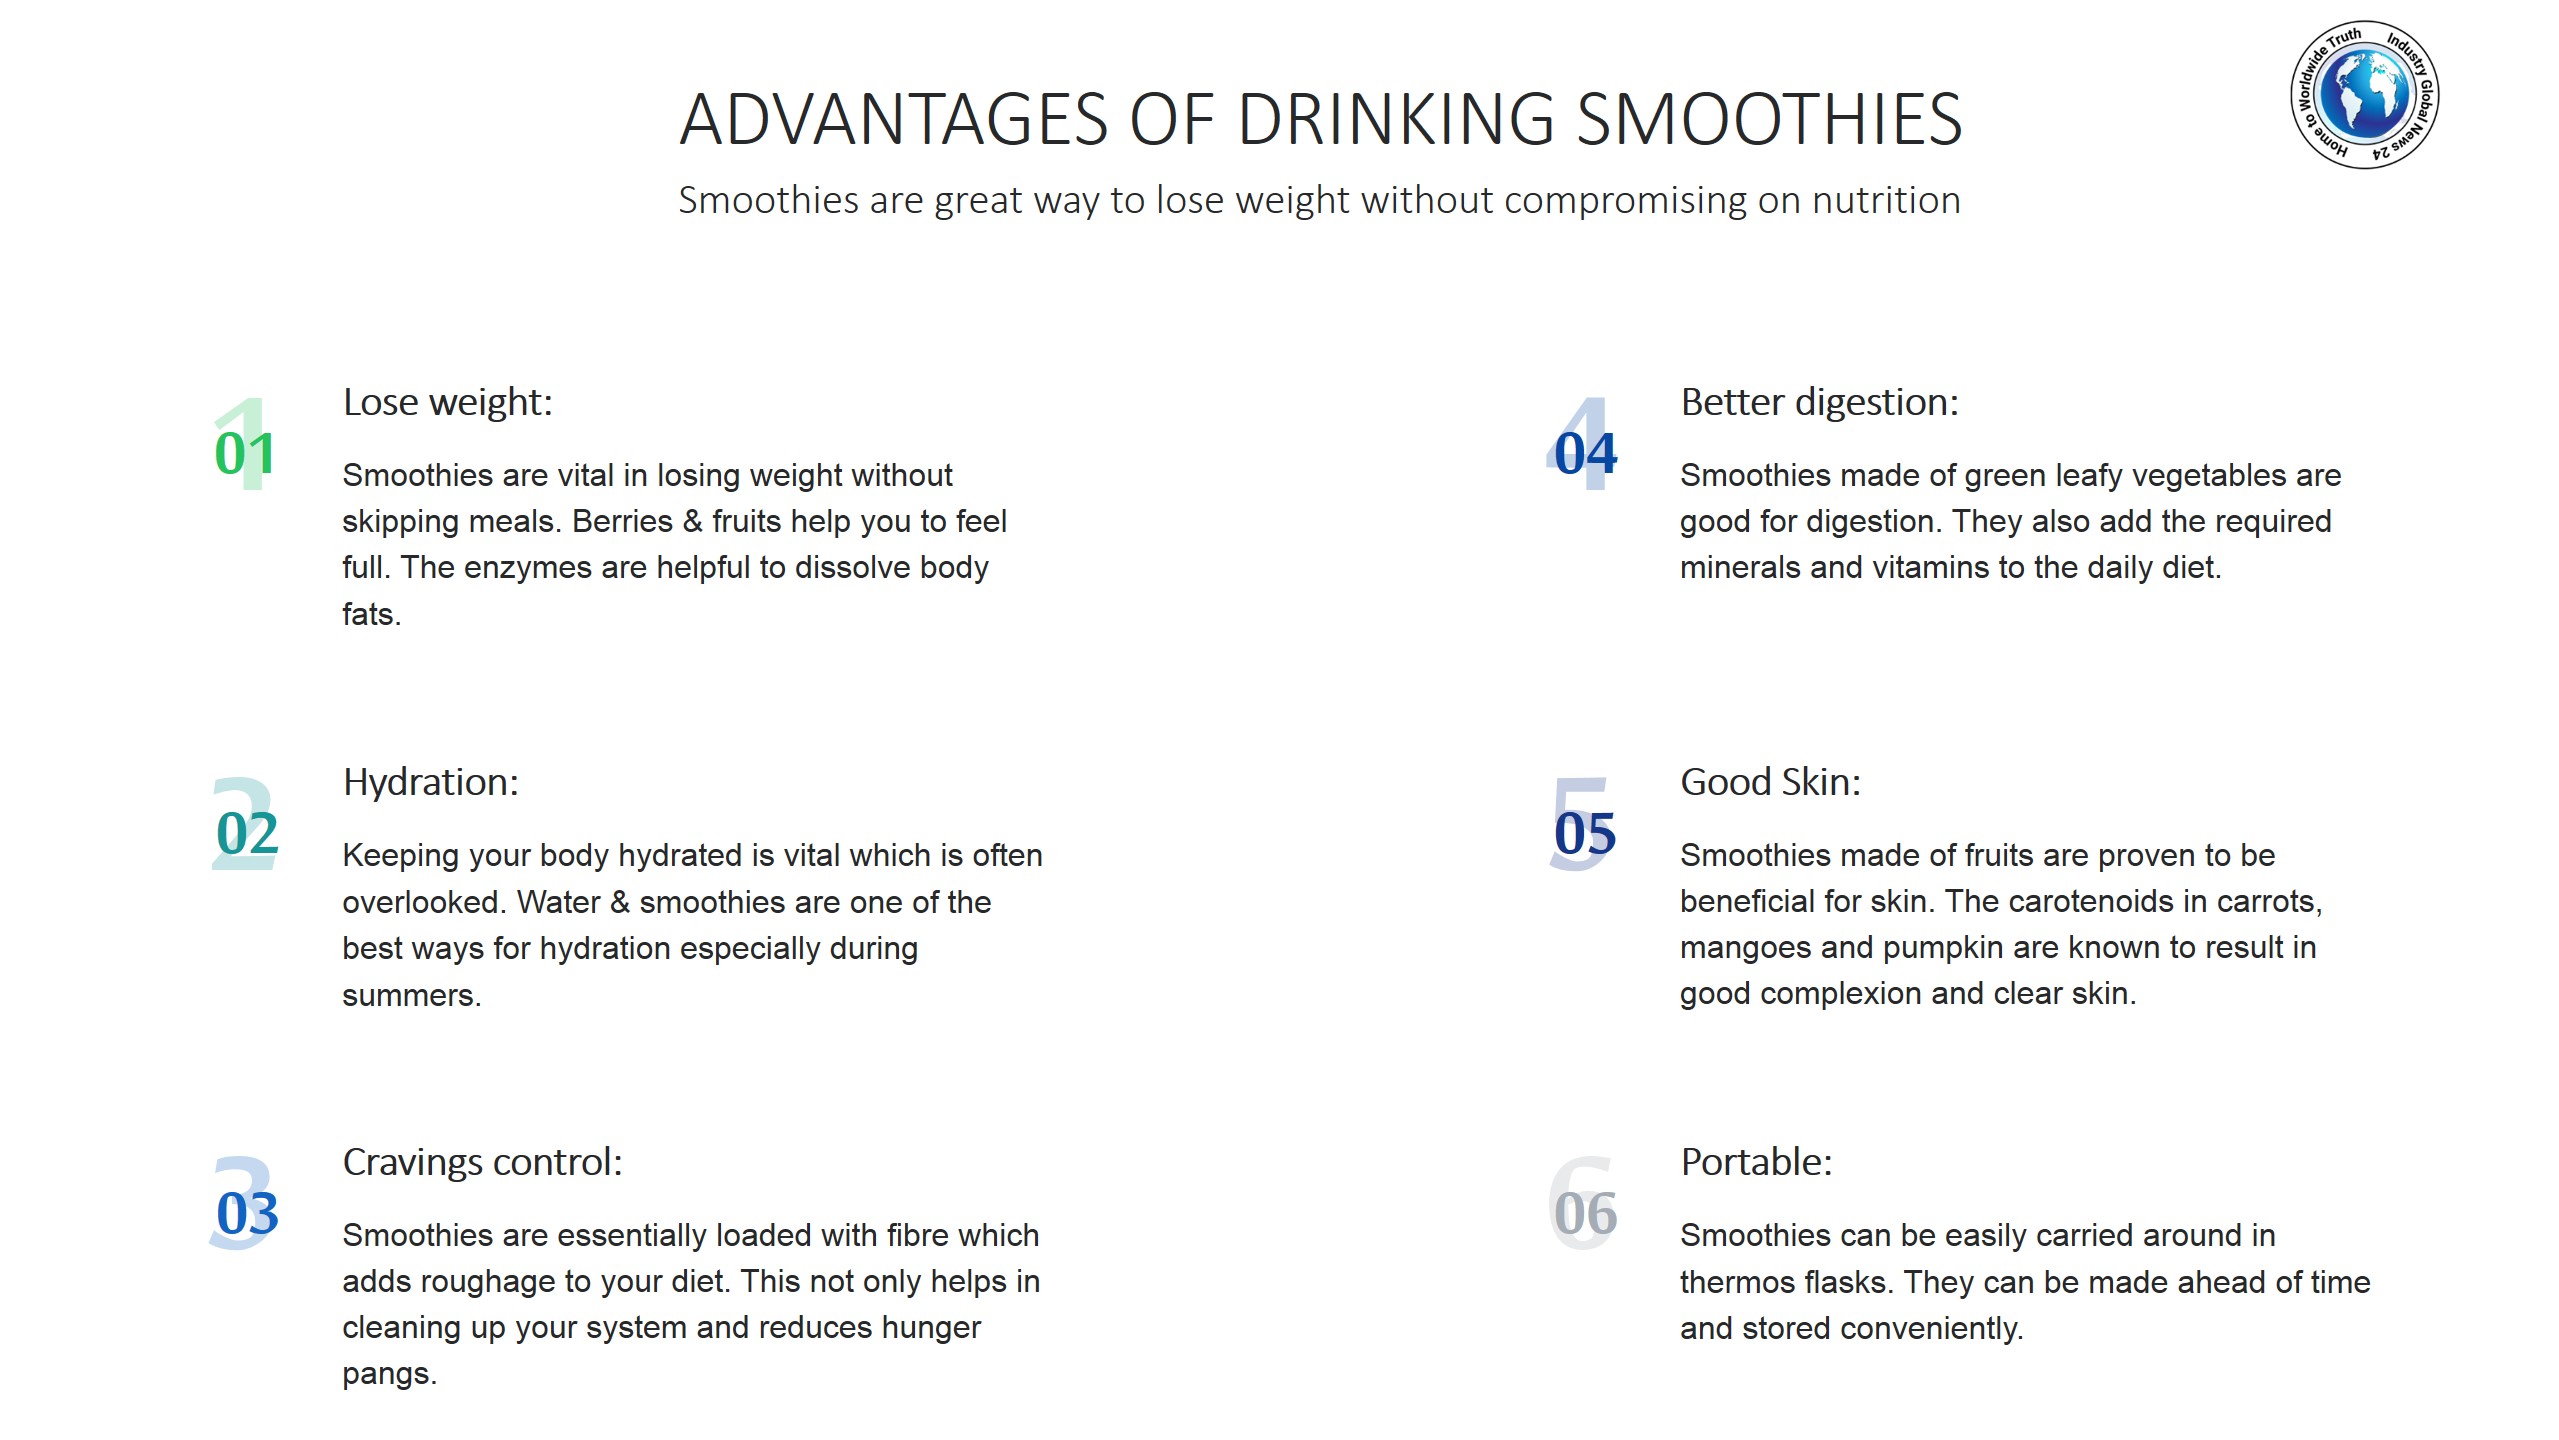 Advantages of drinking smoothies